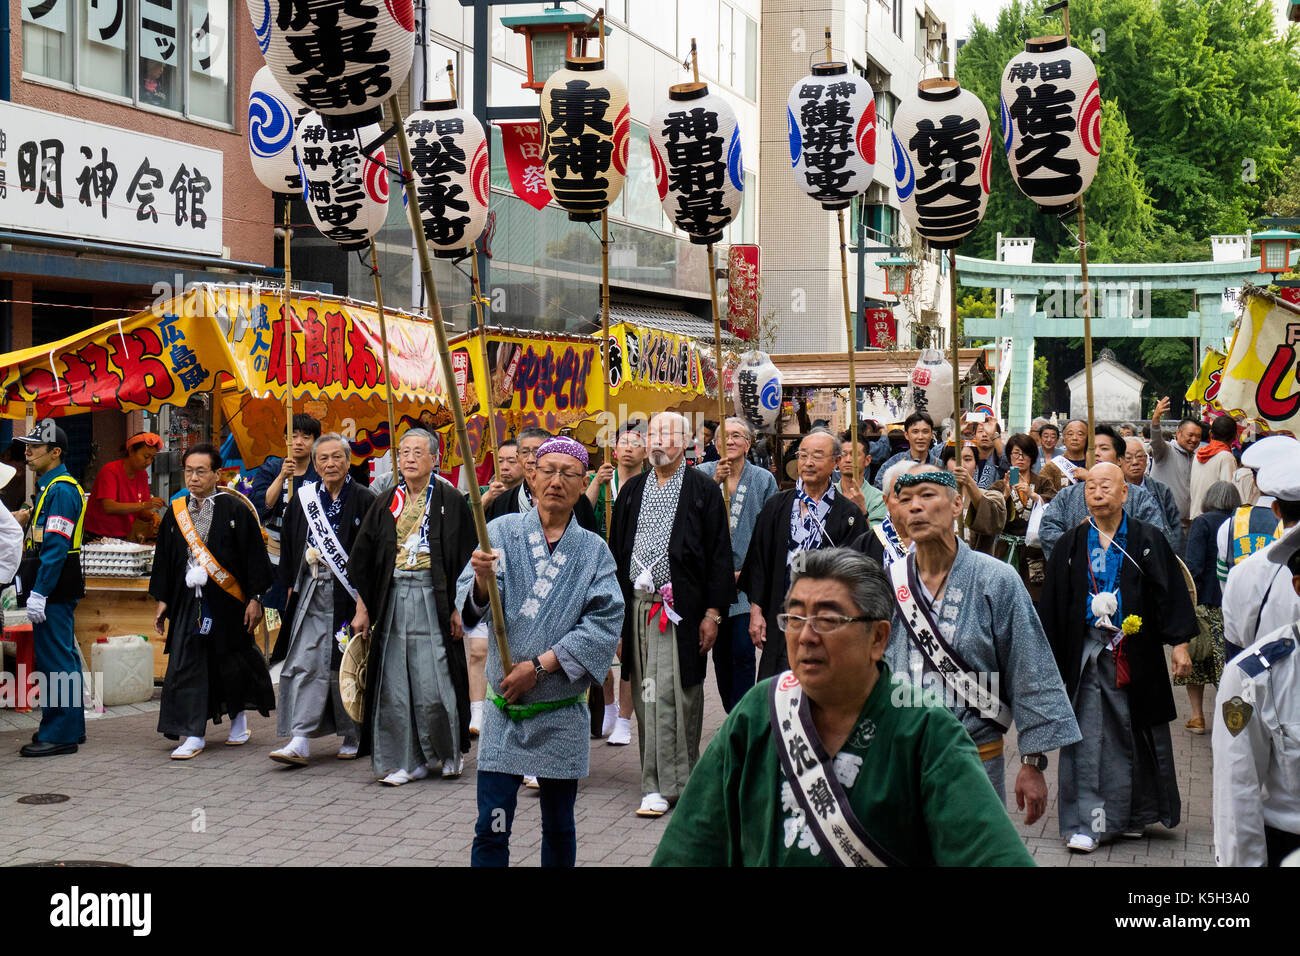 Tokyo, Japan - May 14, 2017: Participants dressed in traditional kimono's carrying paper lanterns with Japanese characters at the Kanda Matsuri Festiv Stock Photo